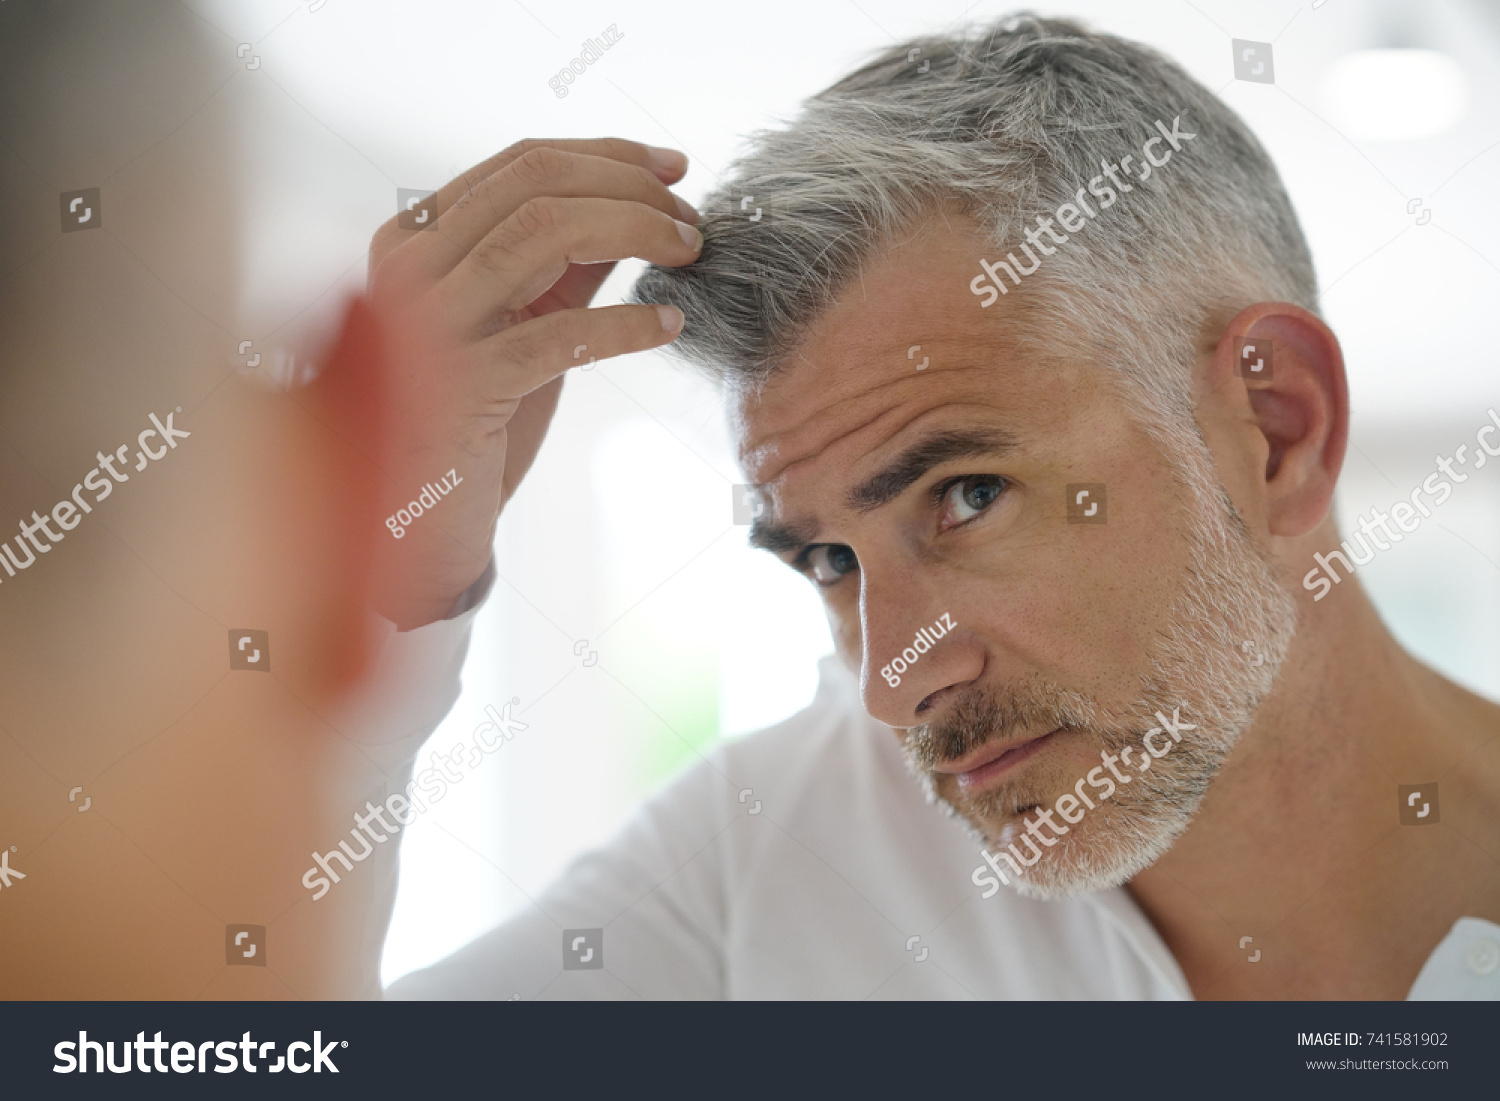 Blonde man with gray hair - wide 5